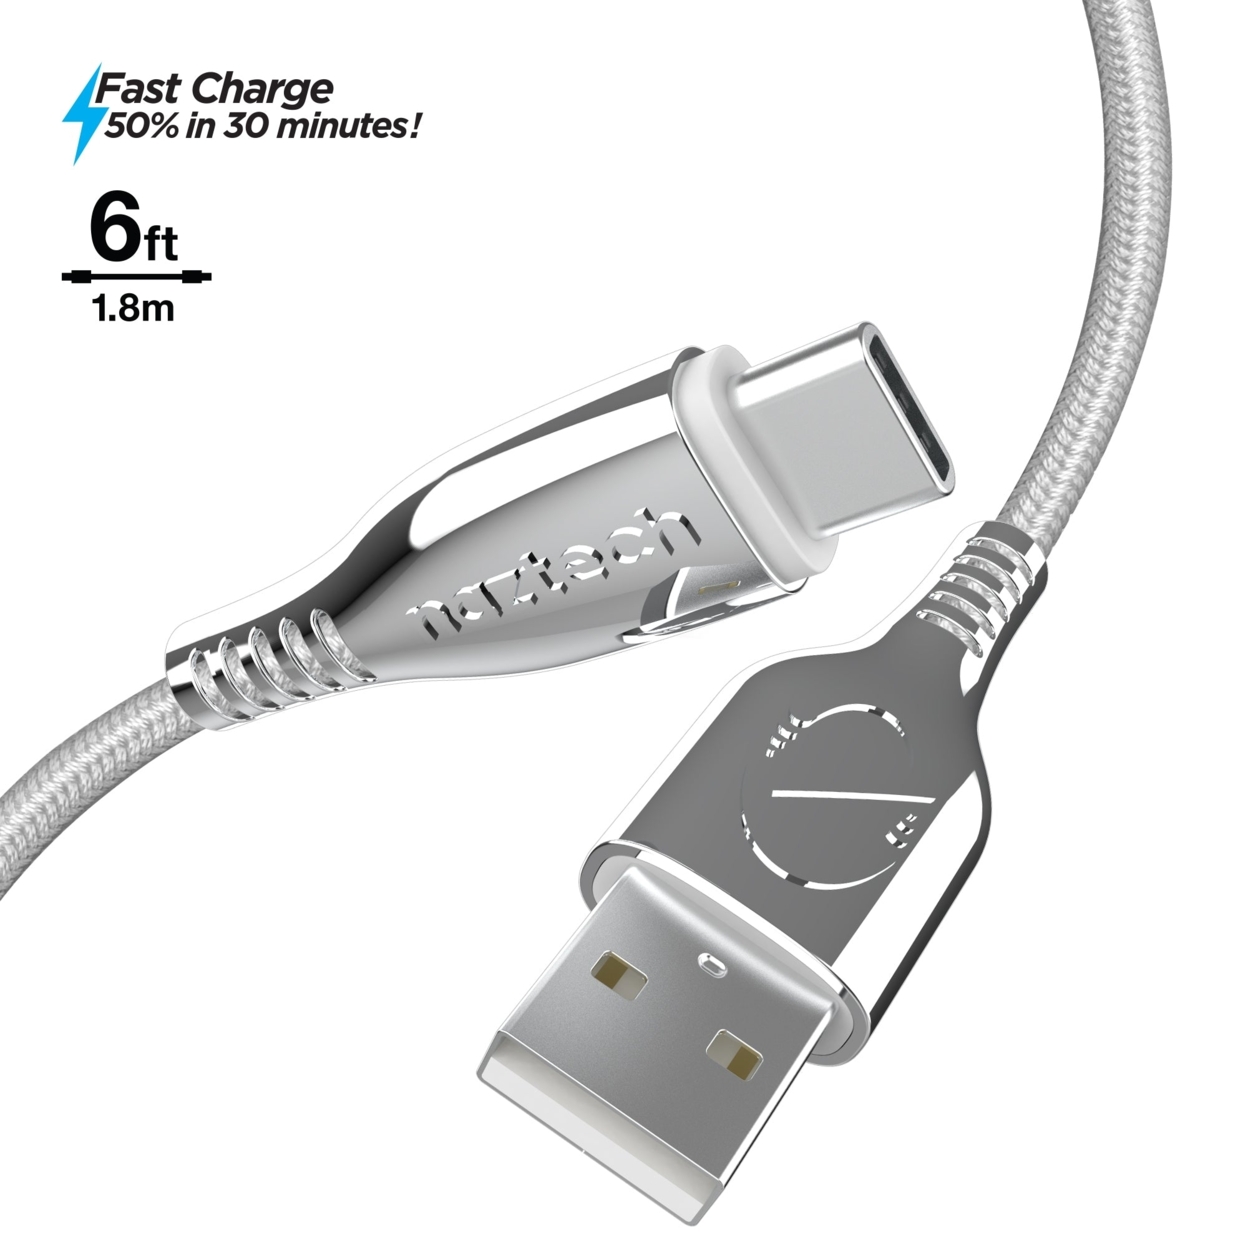 Naztech Titanium USB To USB-C Braided Cable 6ft - White